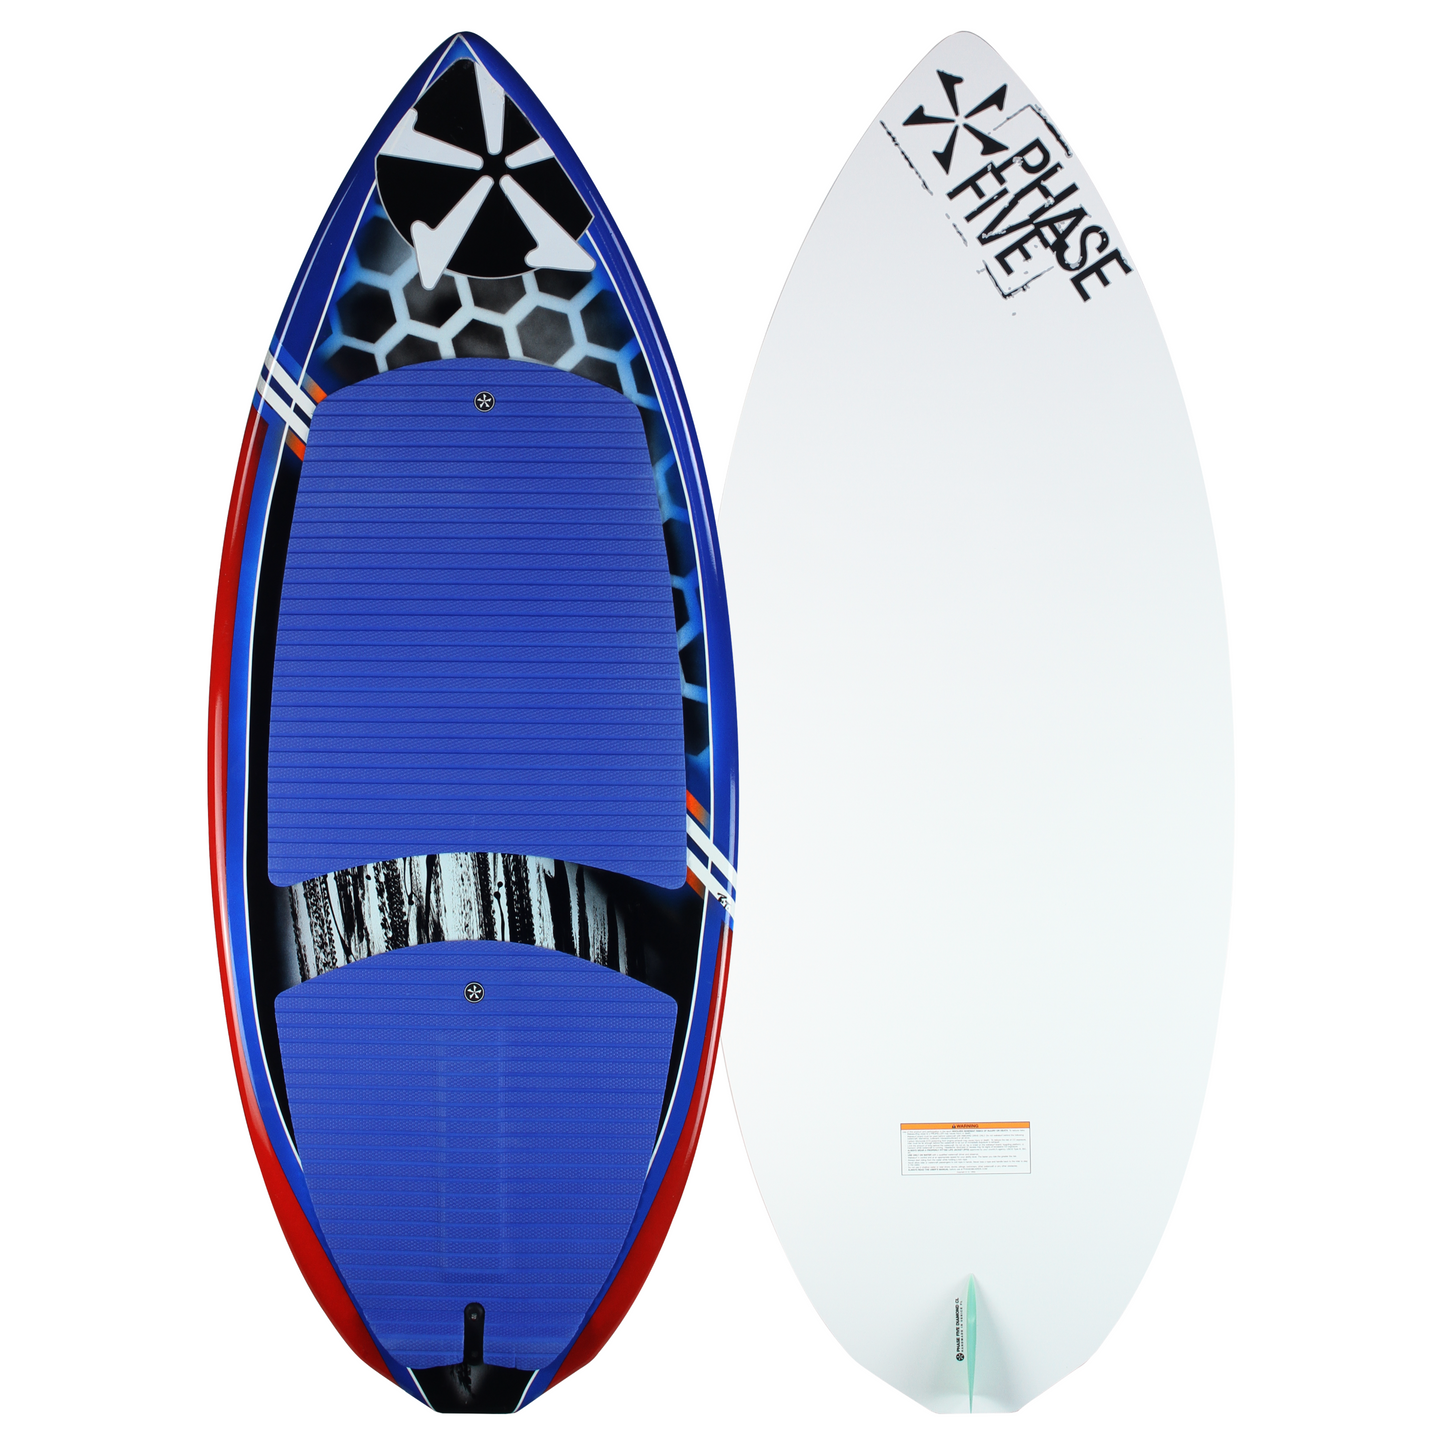 Phase Five Diamond CL wake surf front and back